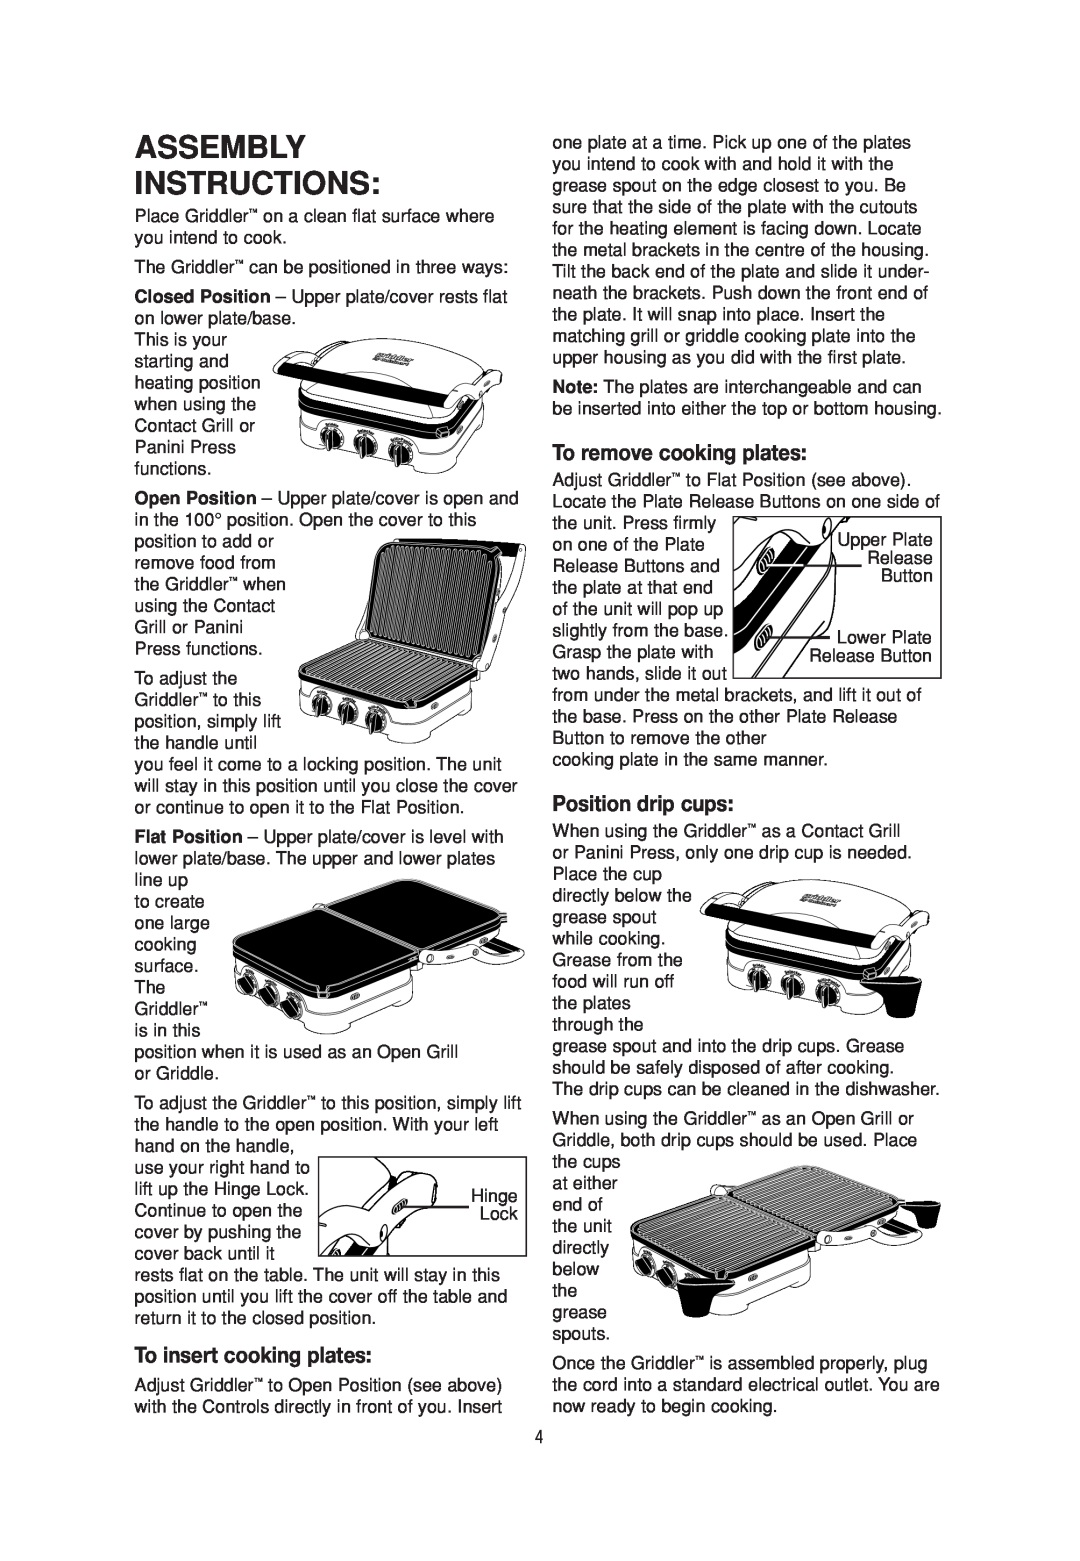 Cuisinart CGR-4C manual Assembly Instructions, To insert cooking plates, To remove cooking plates, Position drip cups 